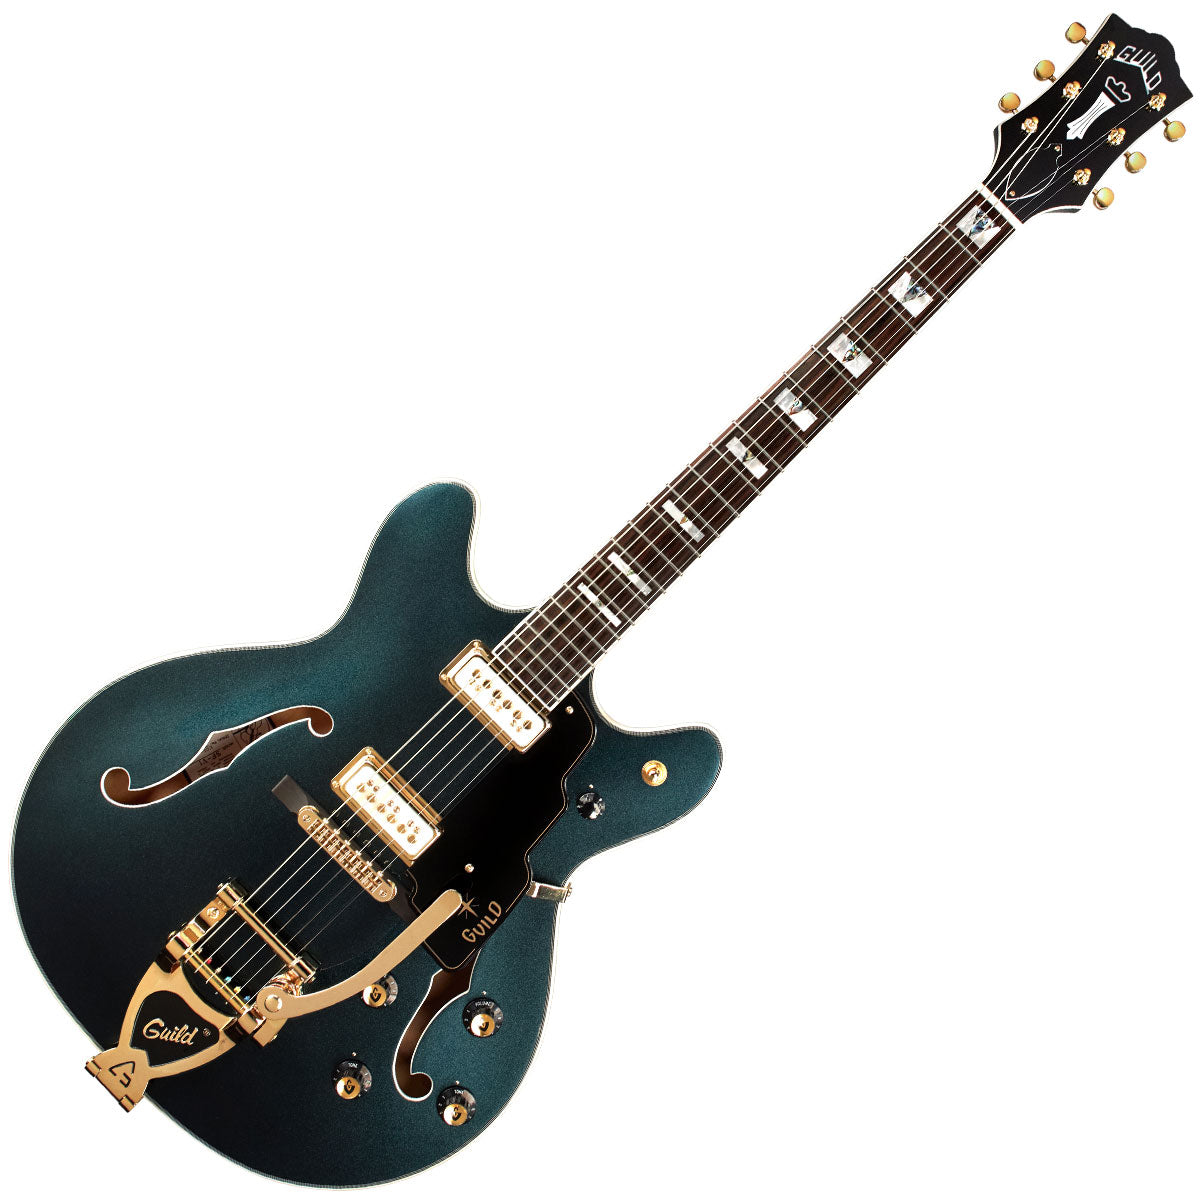 Guild Starfire VI Special Semi-hollowbody Electric Guitar - Kingswood Green